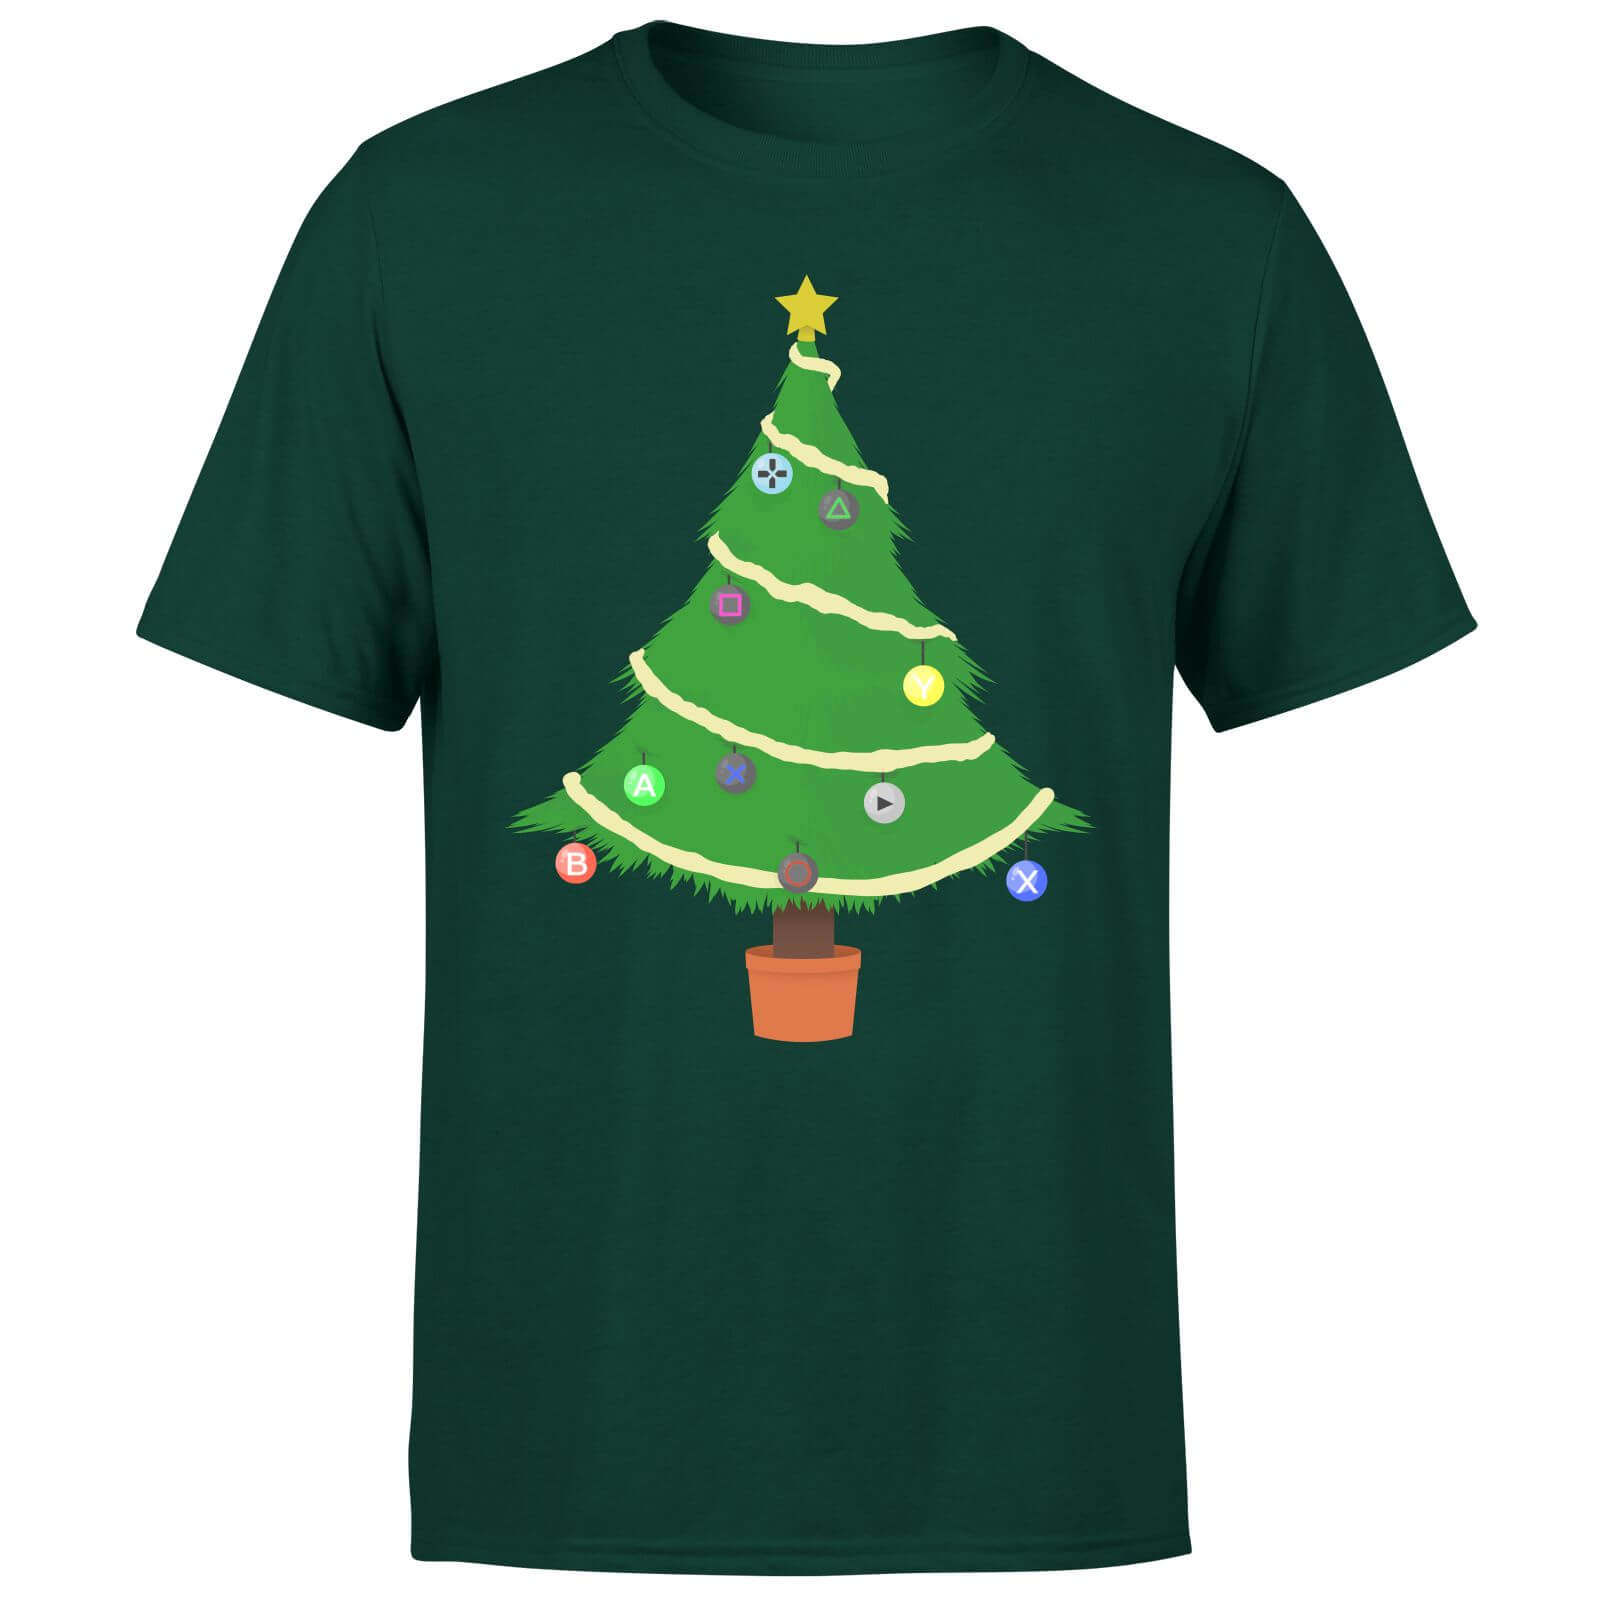 Buttons Tree T-Shirt - Forest Green - M - Forest Green